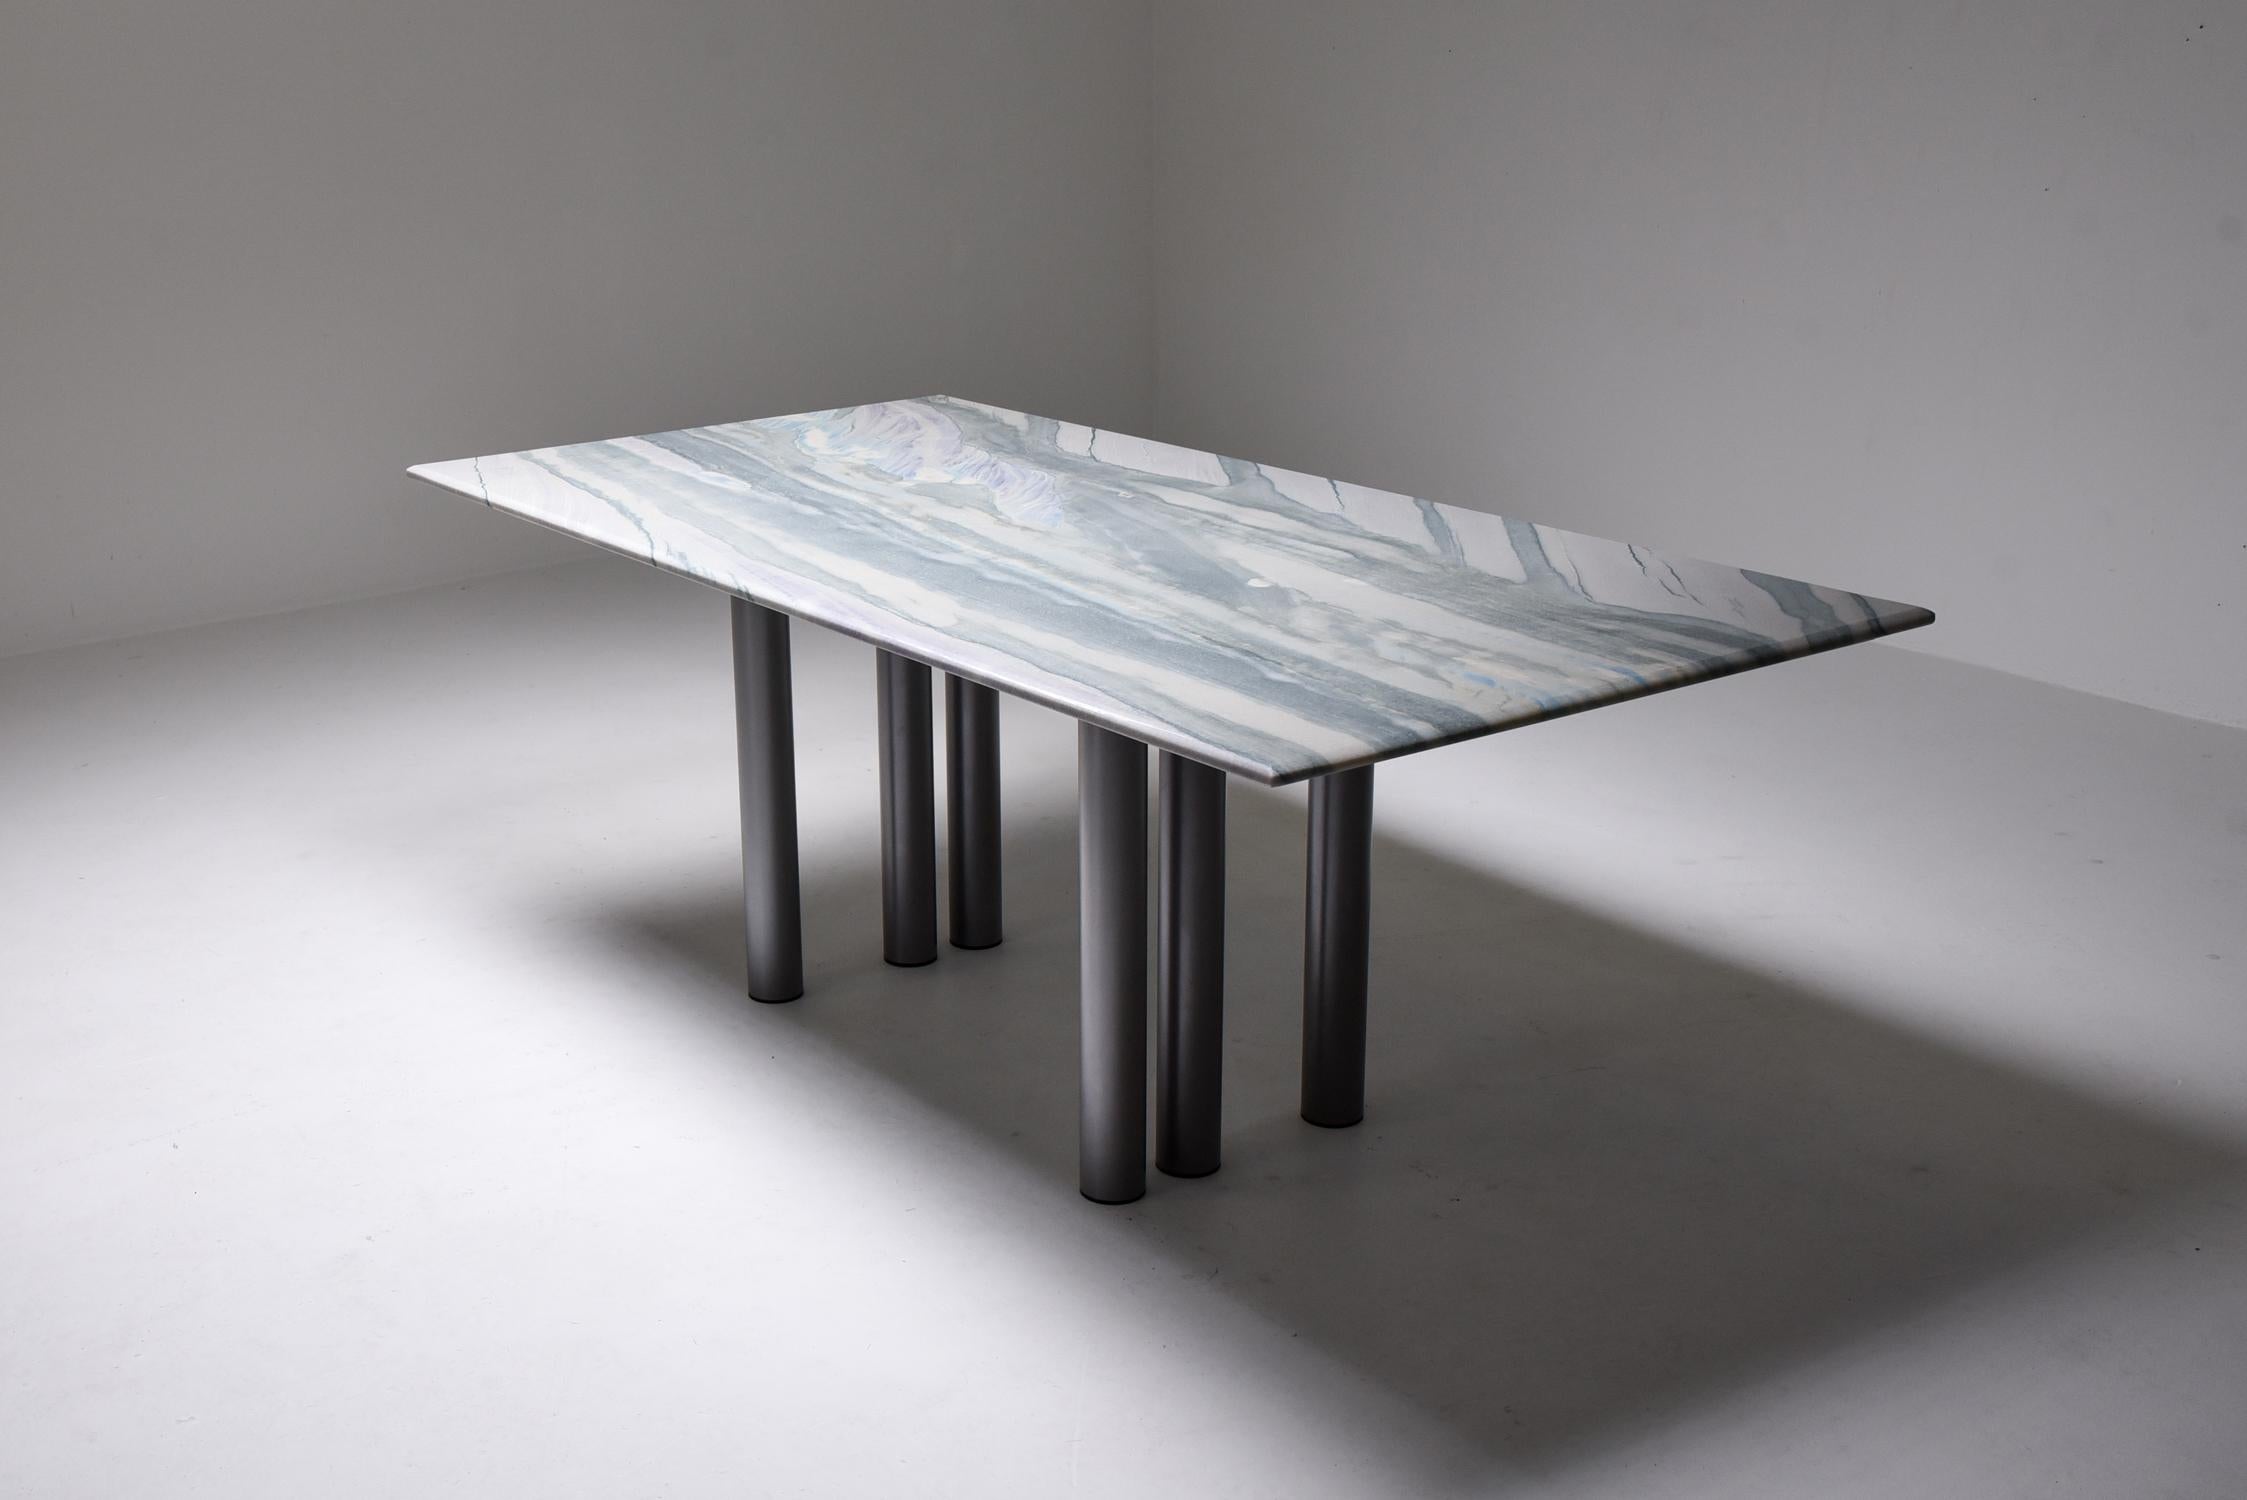 Pia Manu marble dining table, Belgium 1990s

Postmodern dining table from Pia Manu, the marble top displays different shades of gray and some blue to purple.
Grey Lacquered steel base with an asymmetric repetition in the legs.

Pia Manu is a